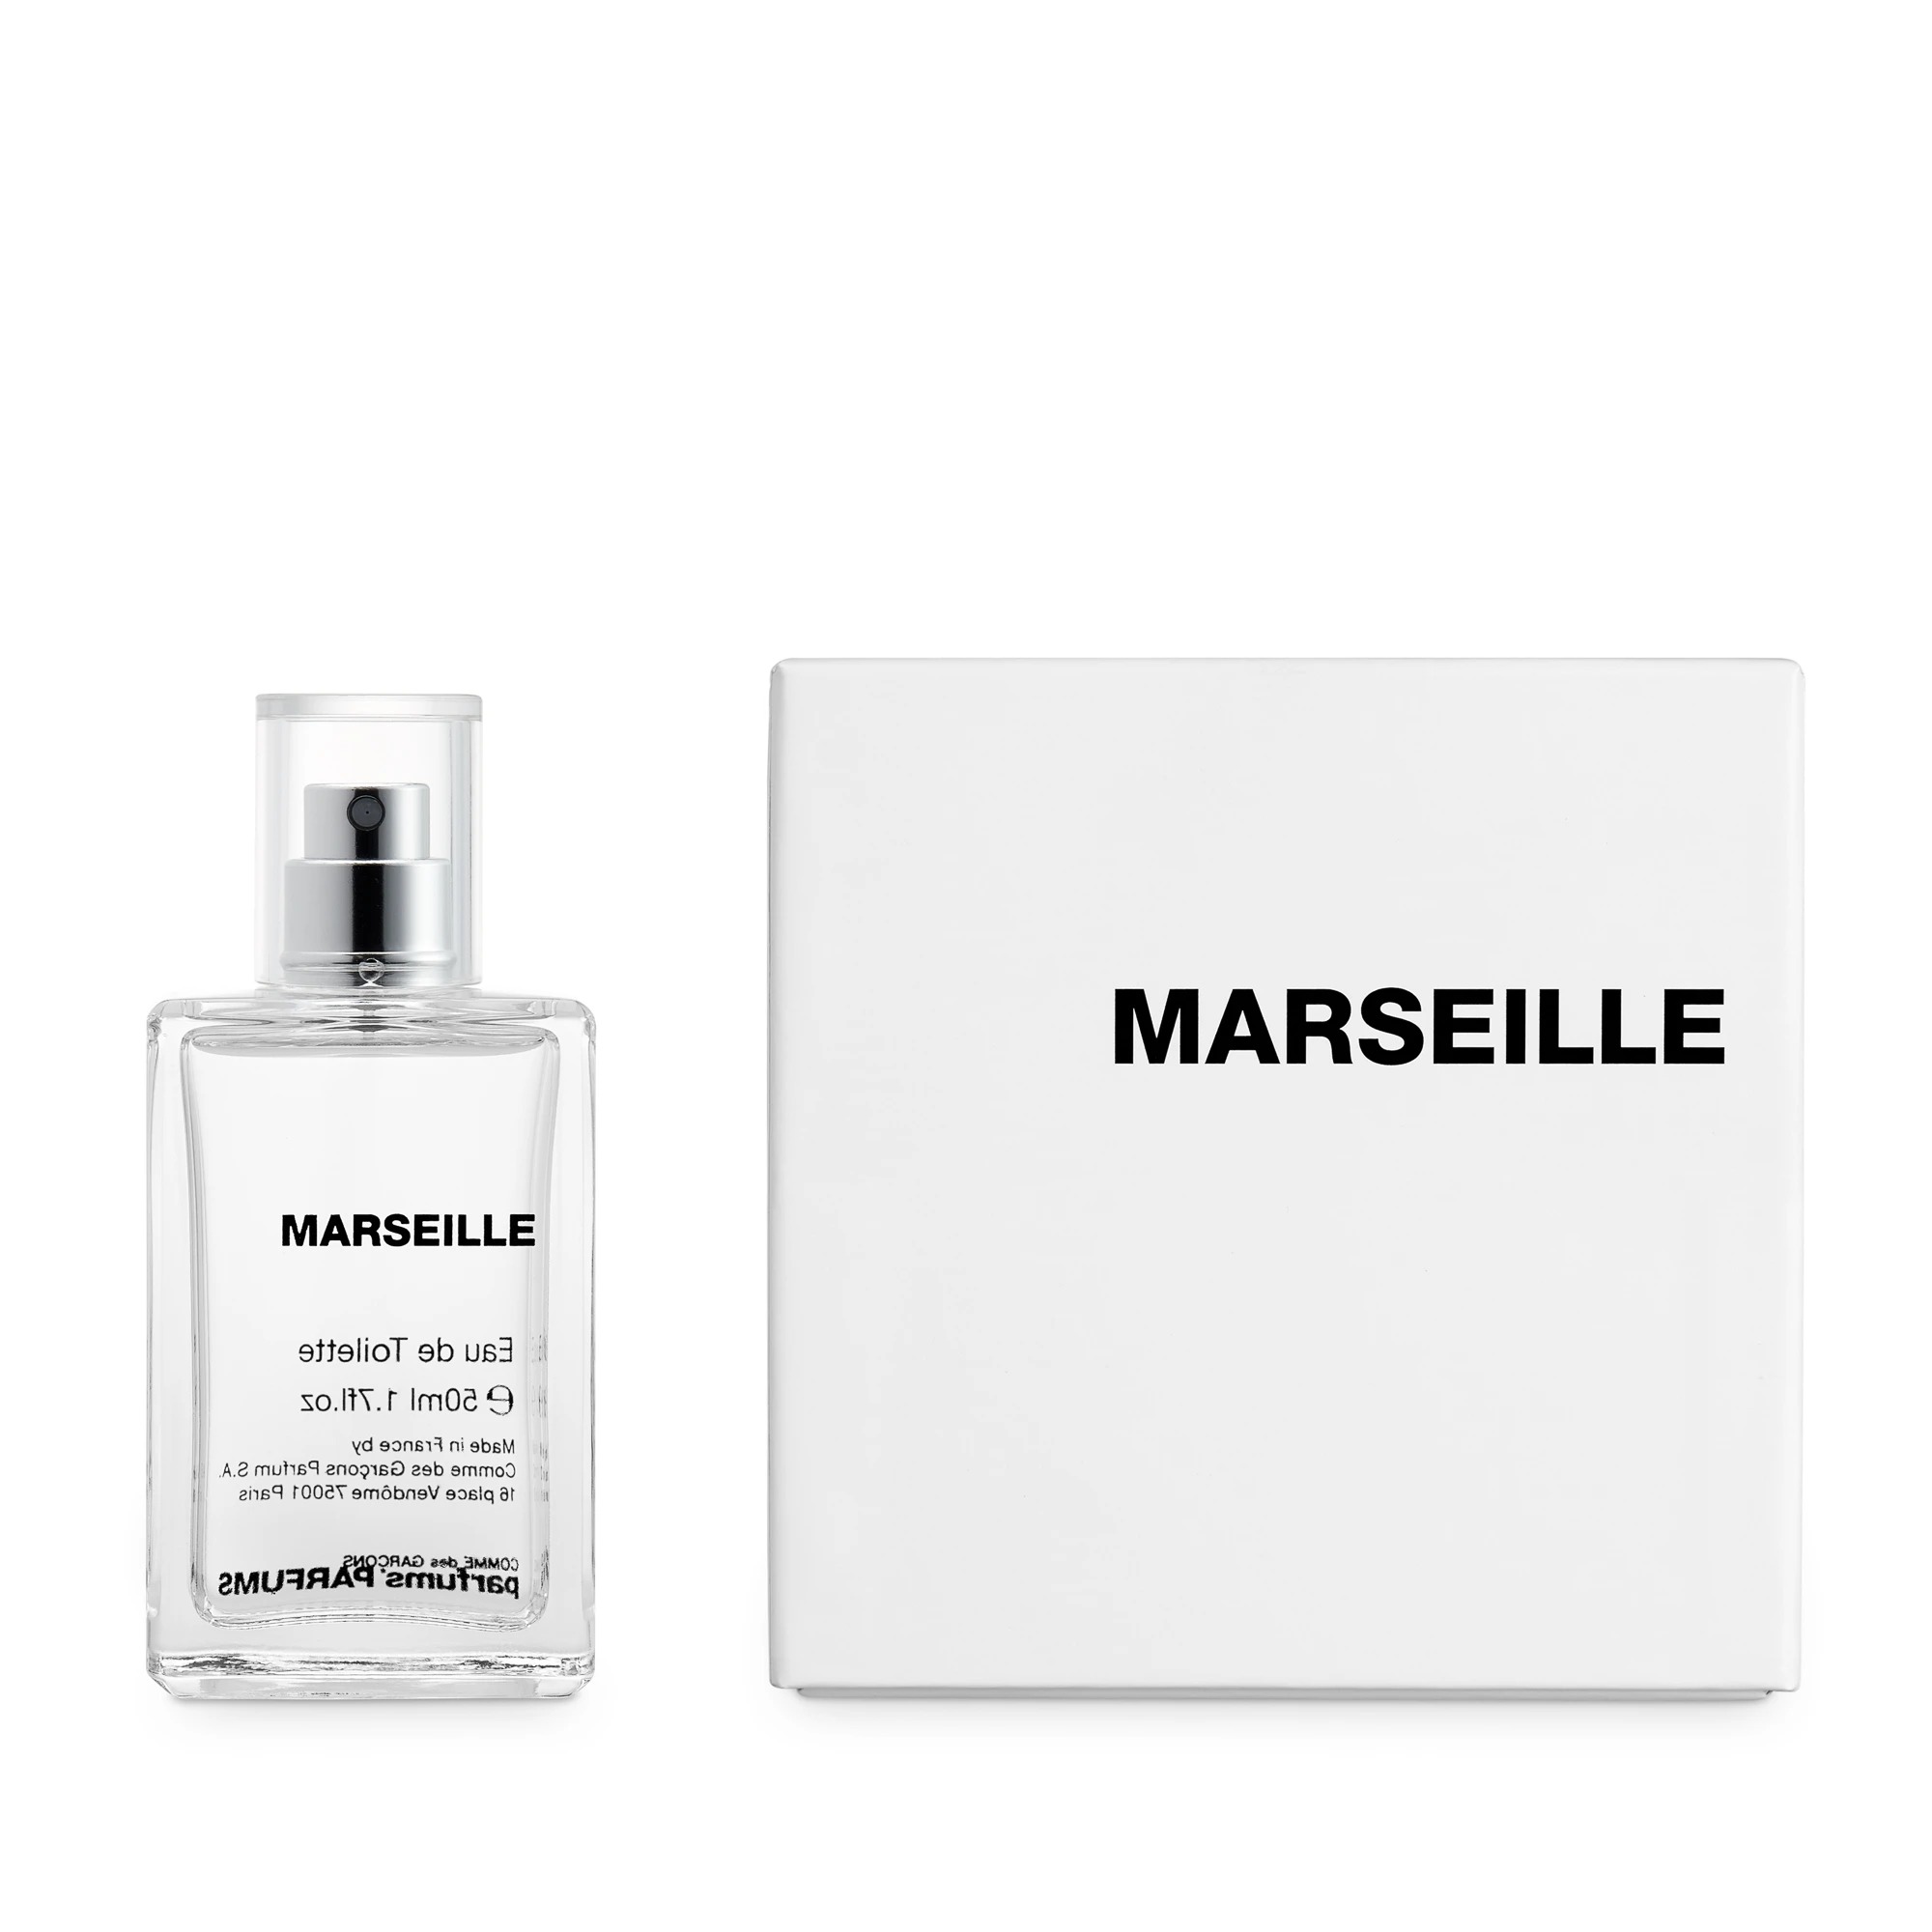 Marseille by COMME des GARÇONS Parfums 2021 30ml USD $85.00 / 50ml Out of Stock